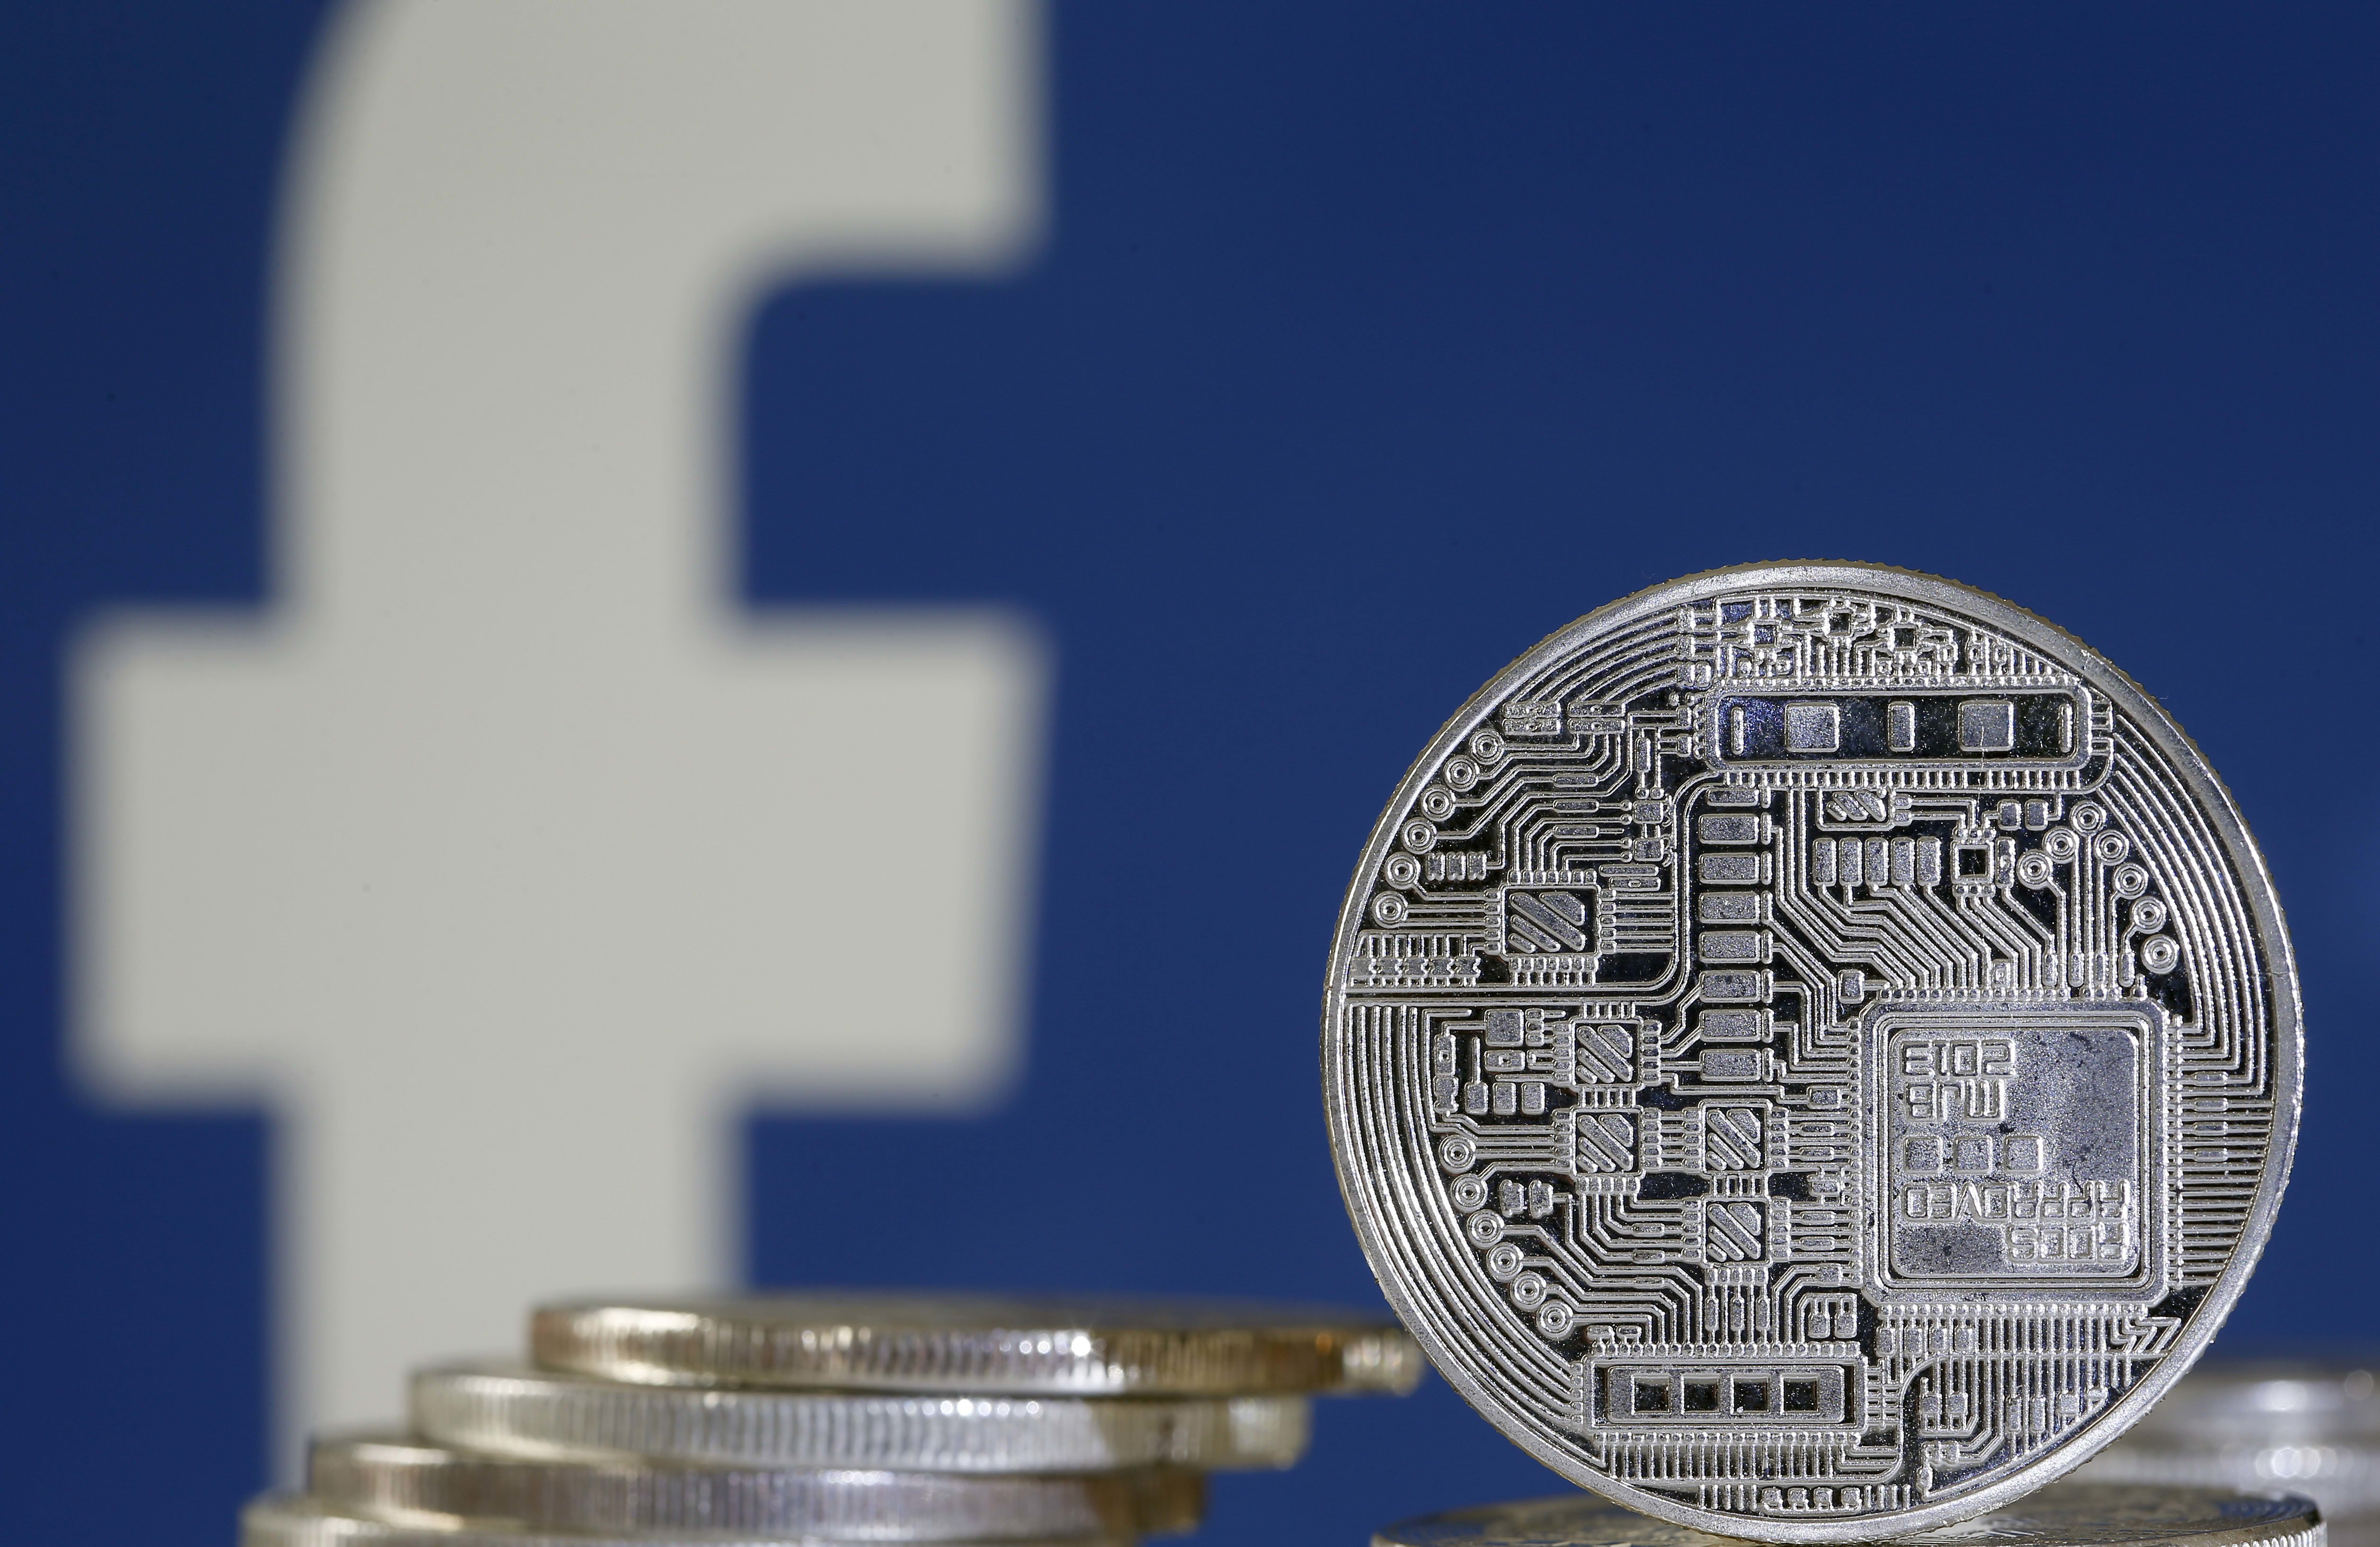 Facebook's Libra reportedly losing support from early investors amid regulatory scrutiny